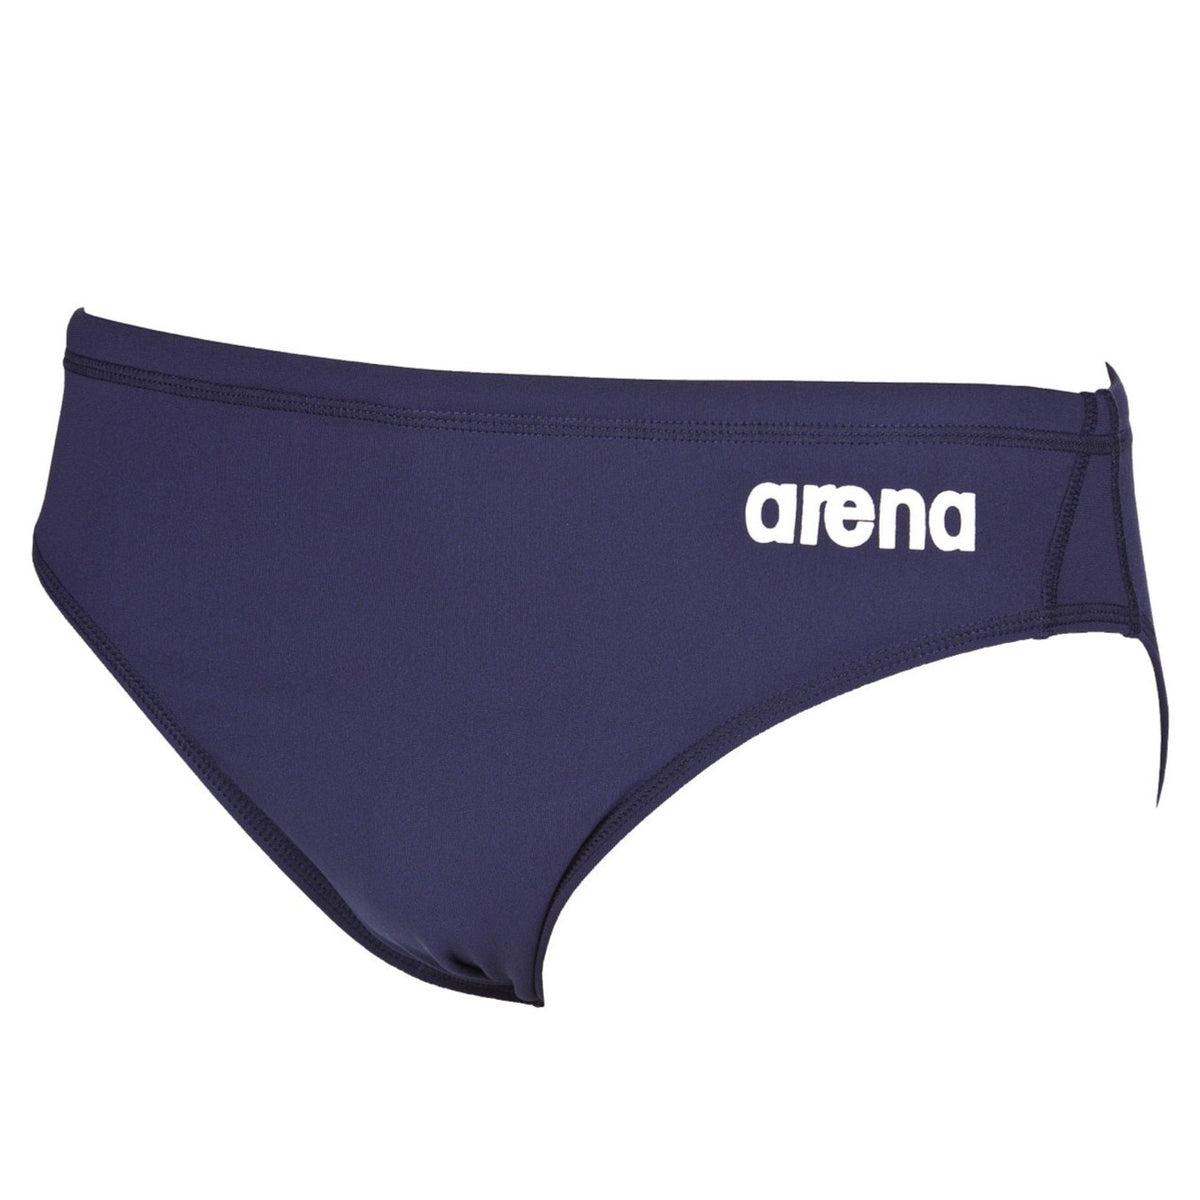 Arena Men's Icons Solid Brief Swimsuit at